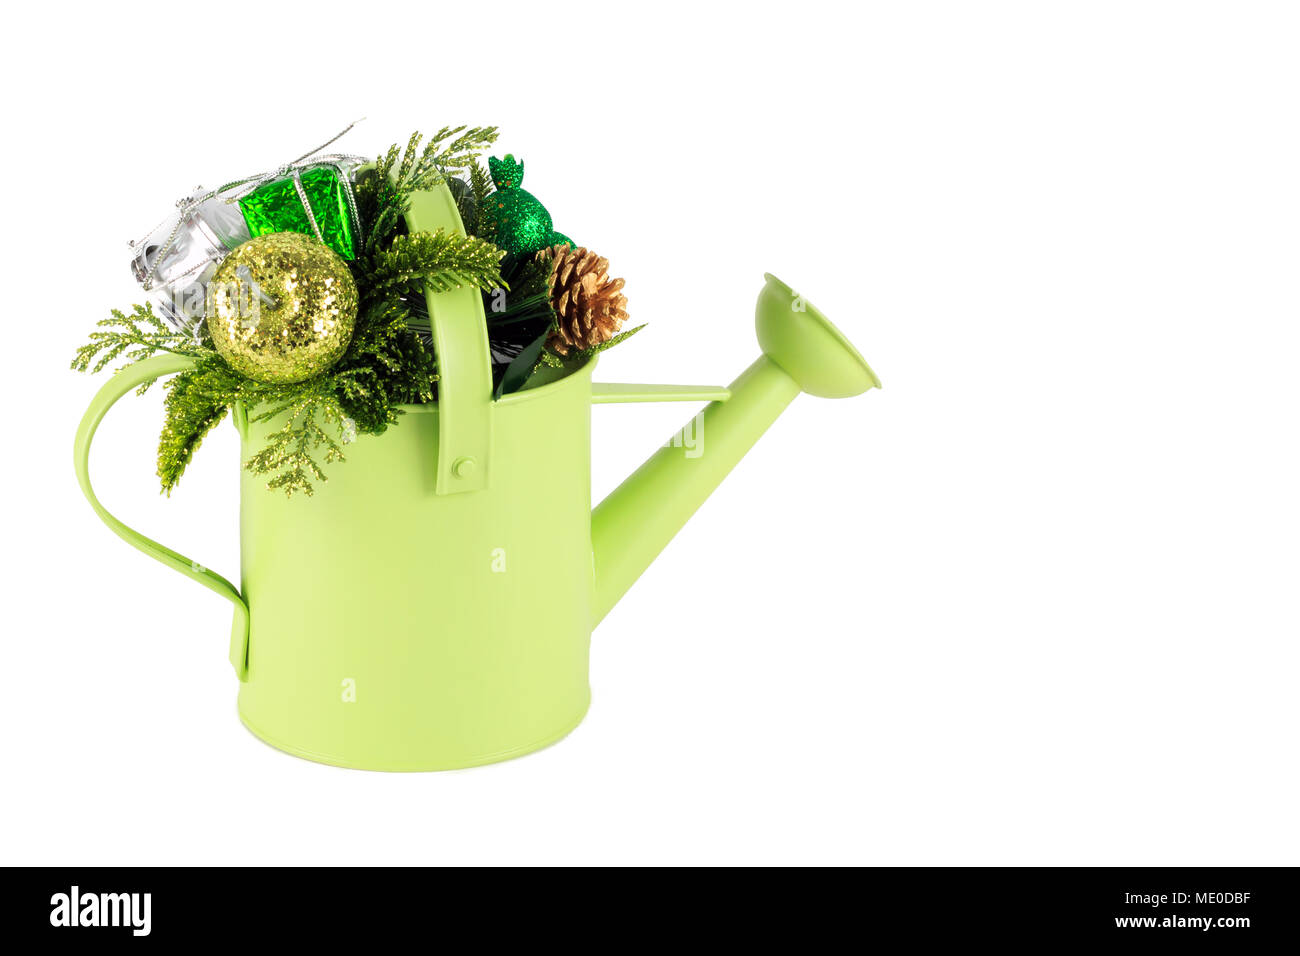 Christmas decorations in small bright green watering can isolated on white background Stock Photo